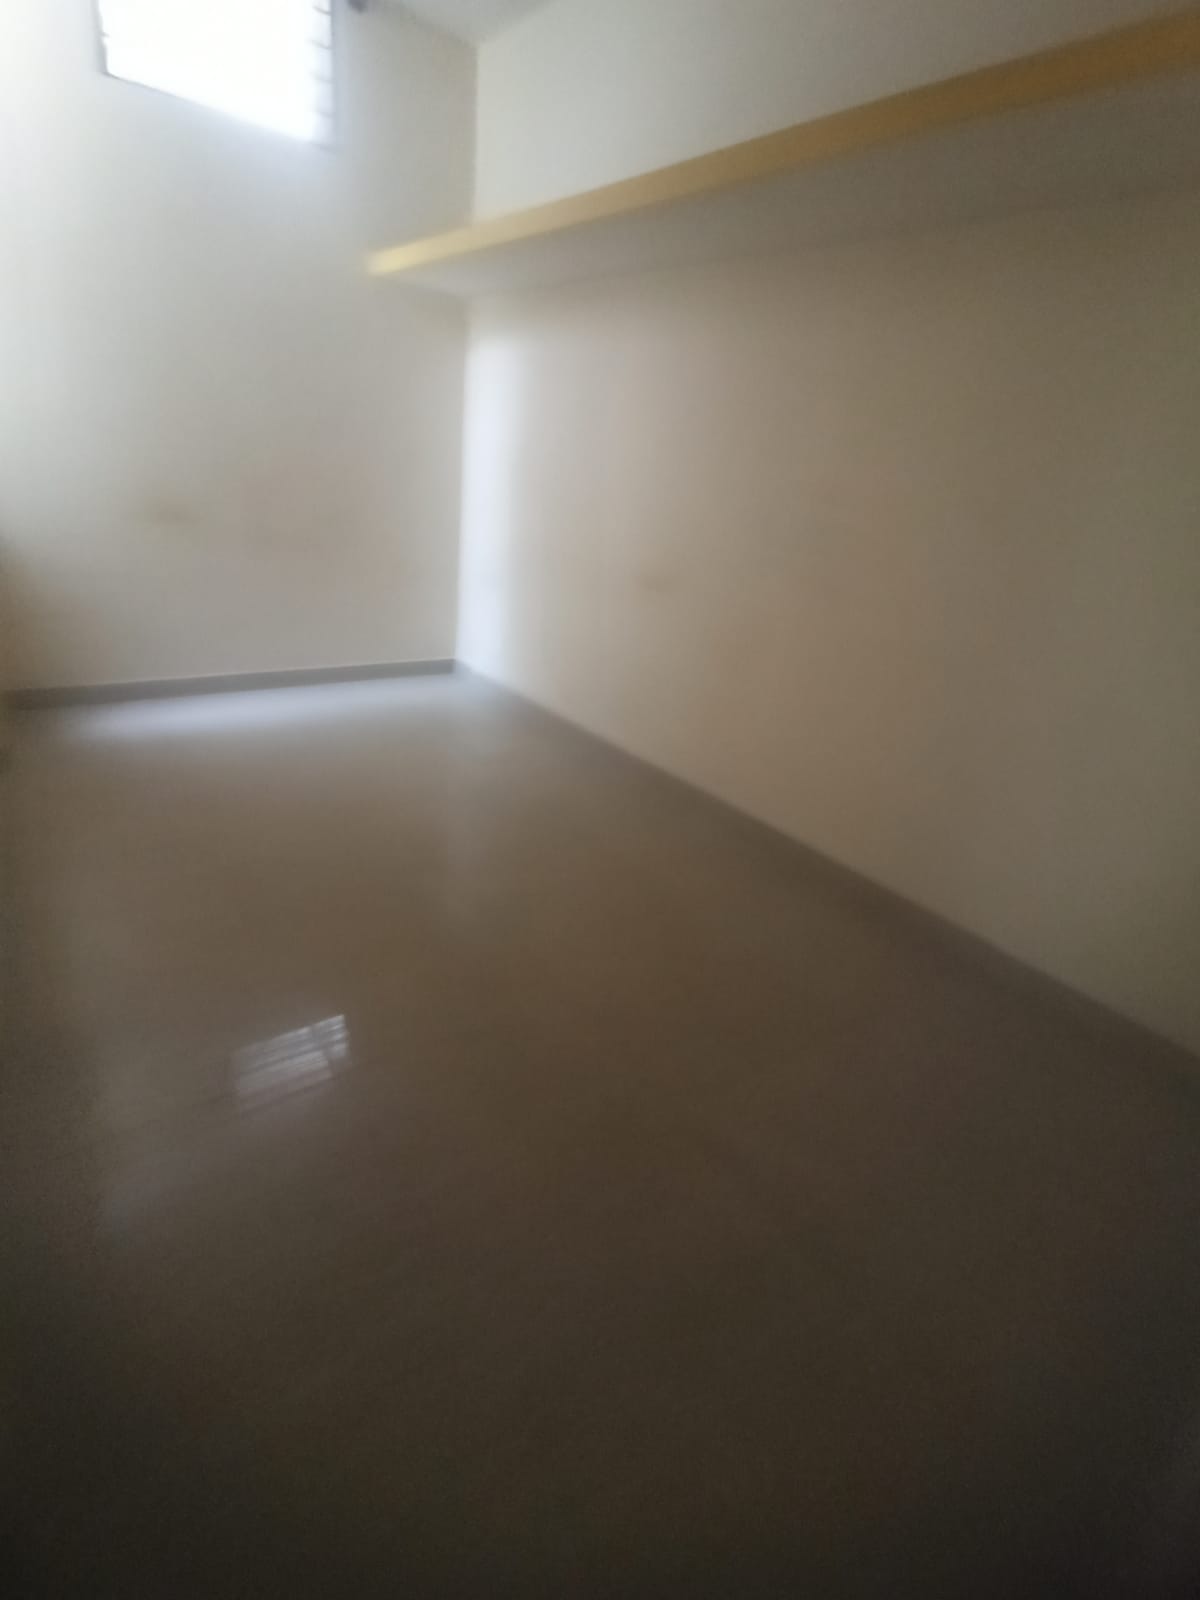 2 BHK Independent House for Lease Only at JAML2 - 3567 - 12 Lakhs in Rajaji Nagar